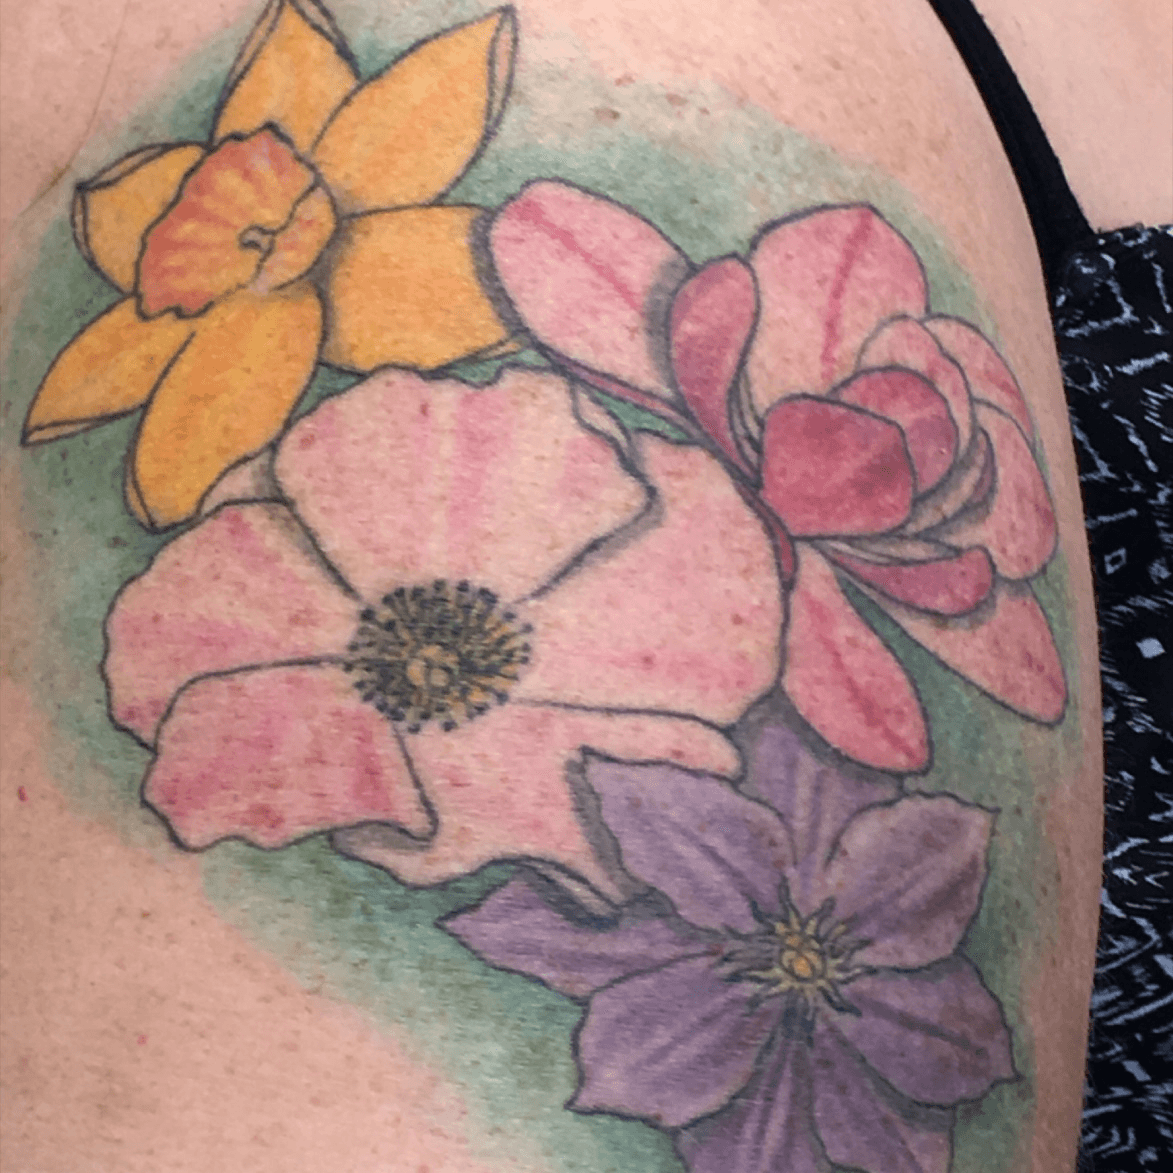 Start of my floral sleeveClematis tattoo